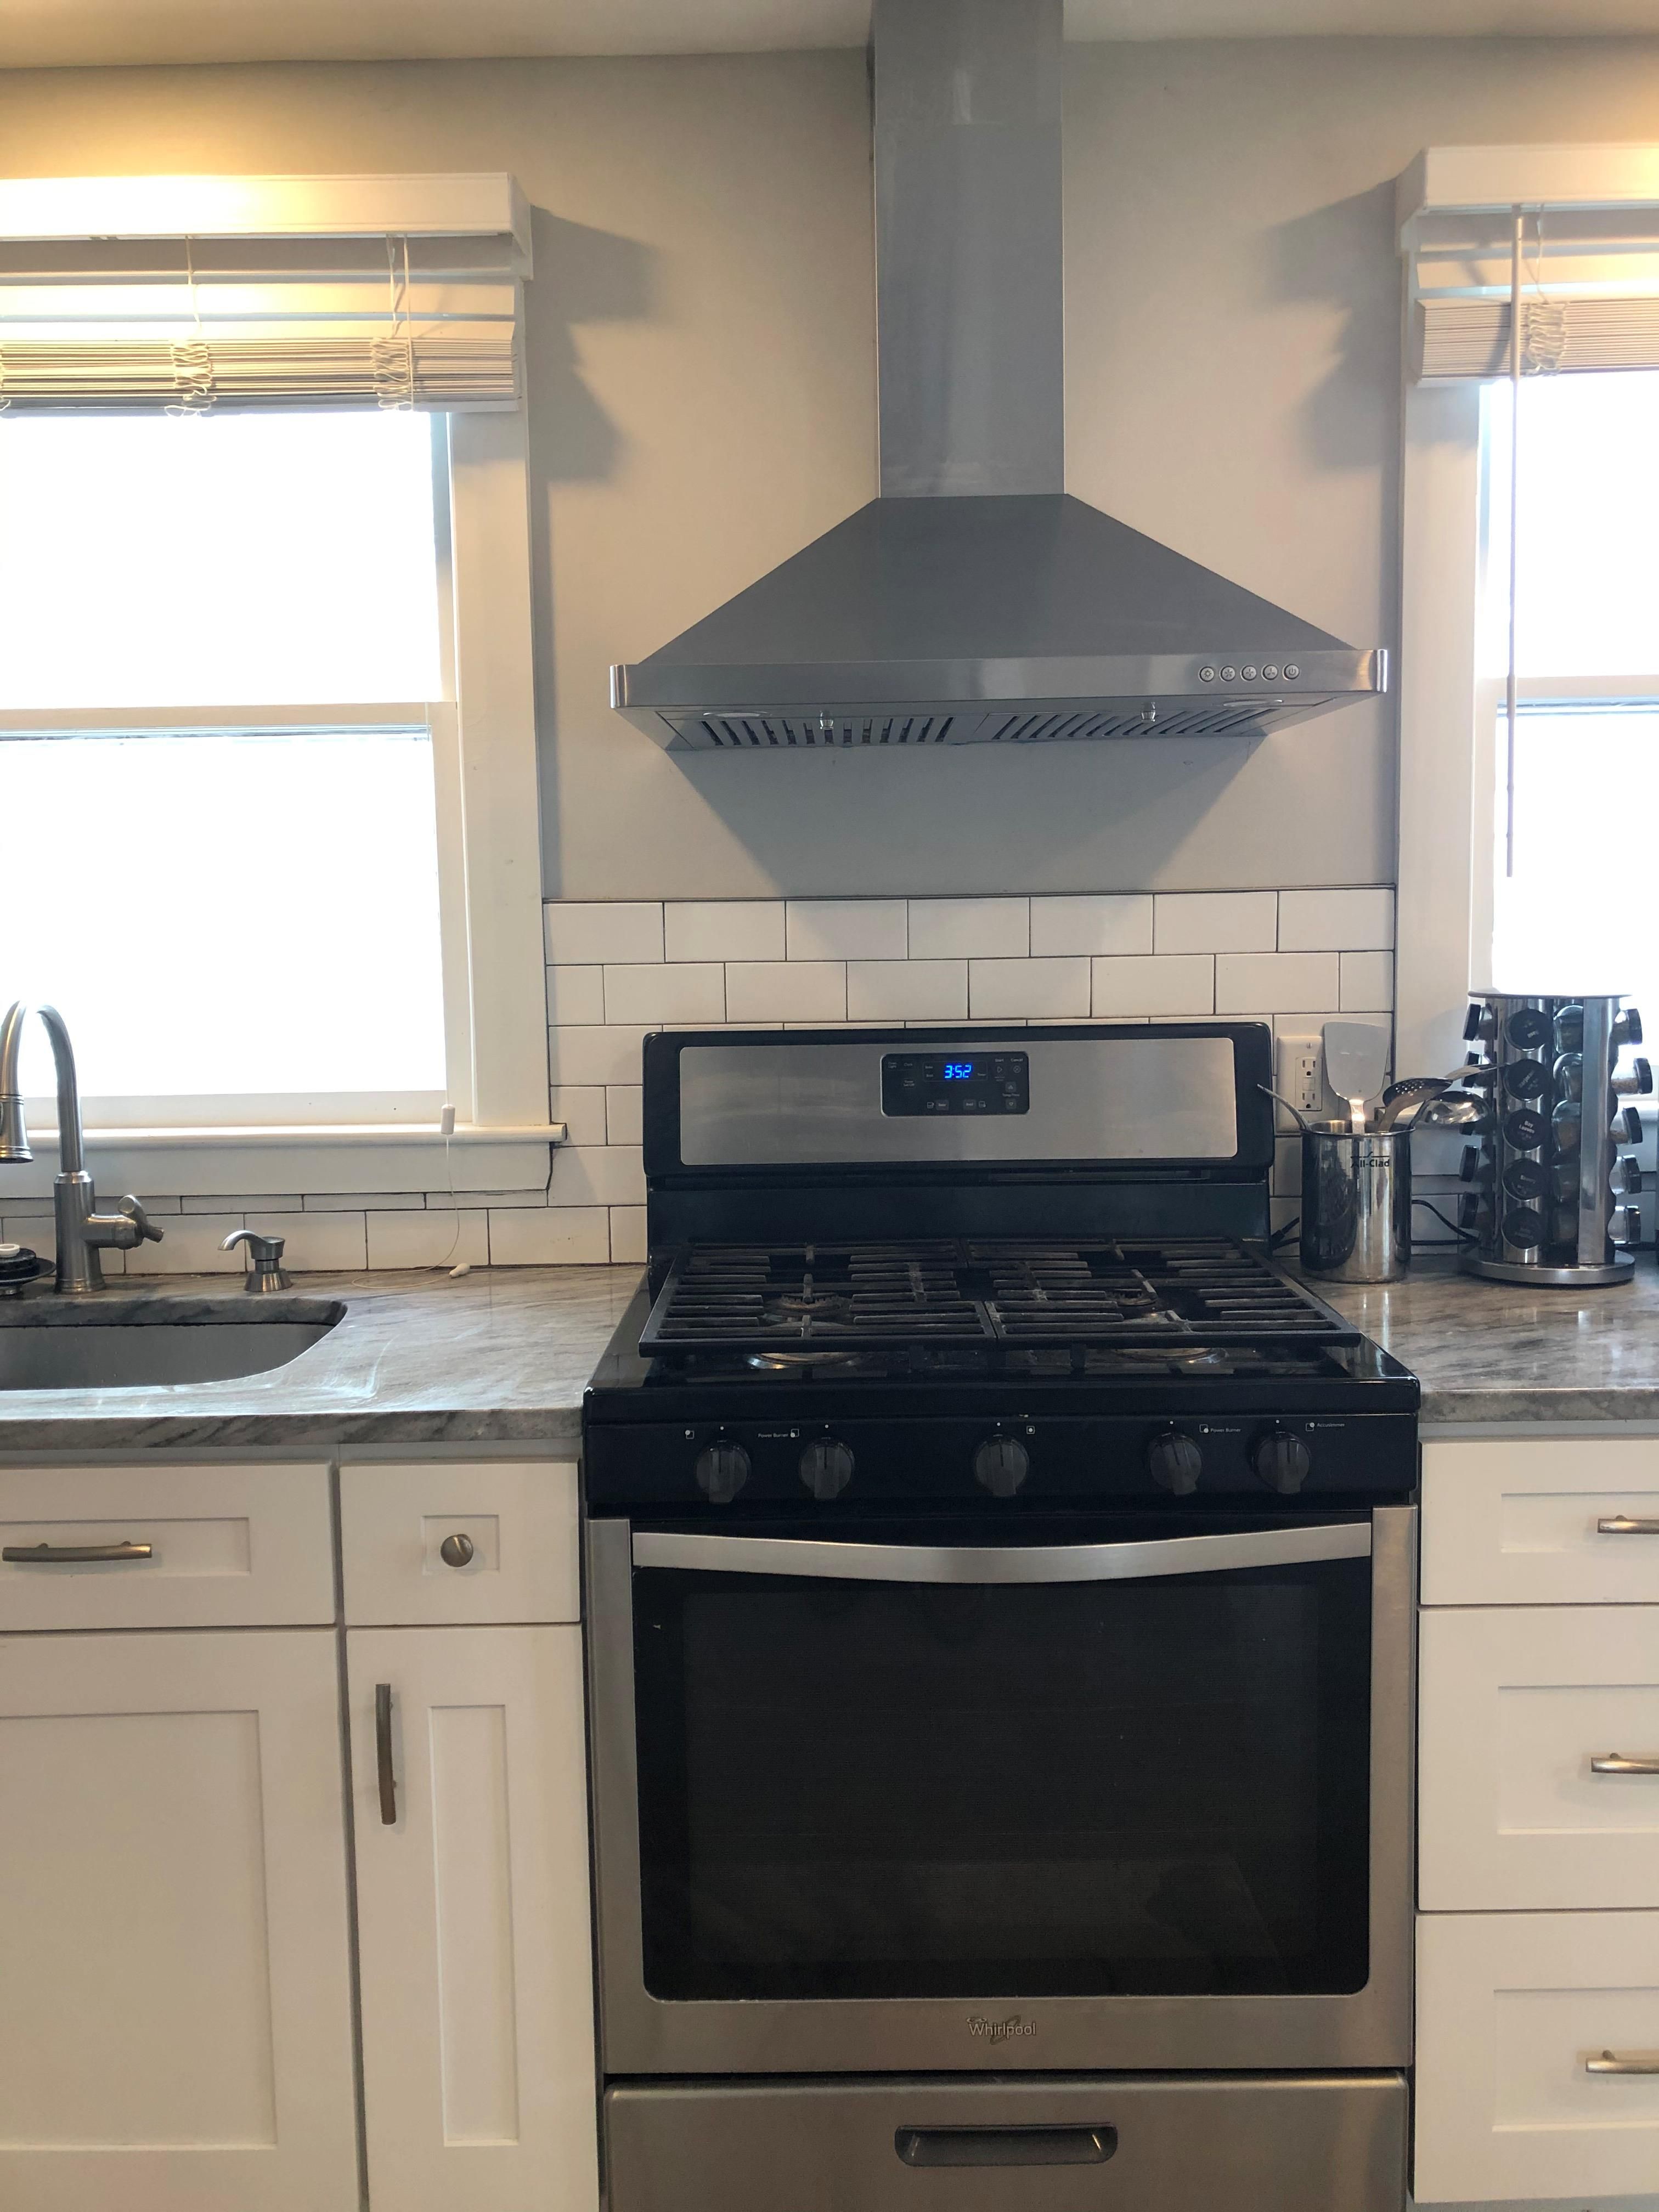 Ducted range hood over stove in kitchen